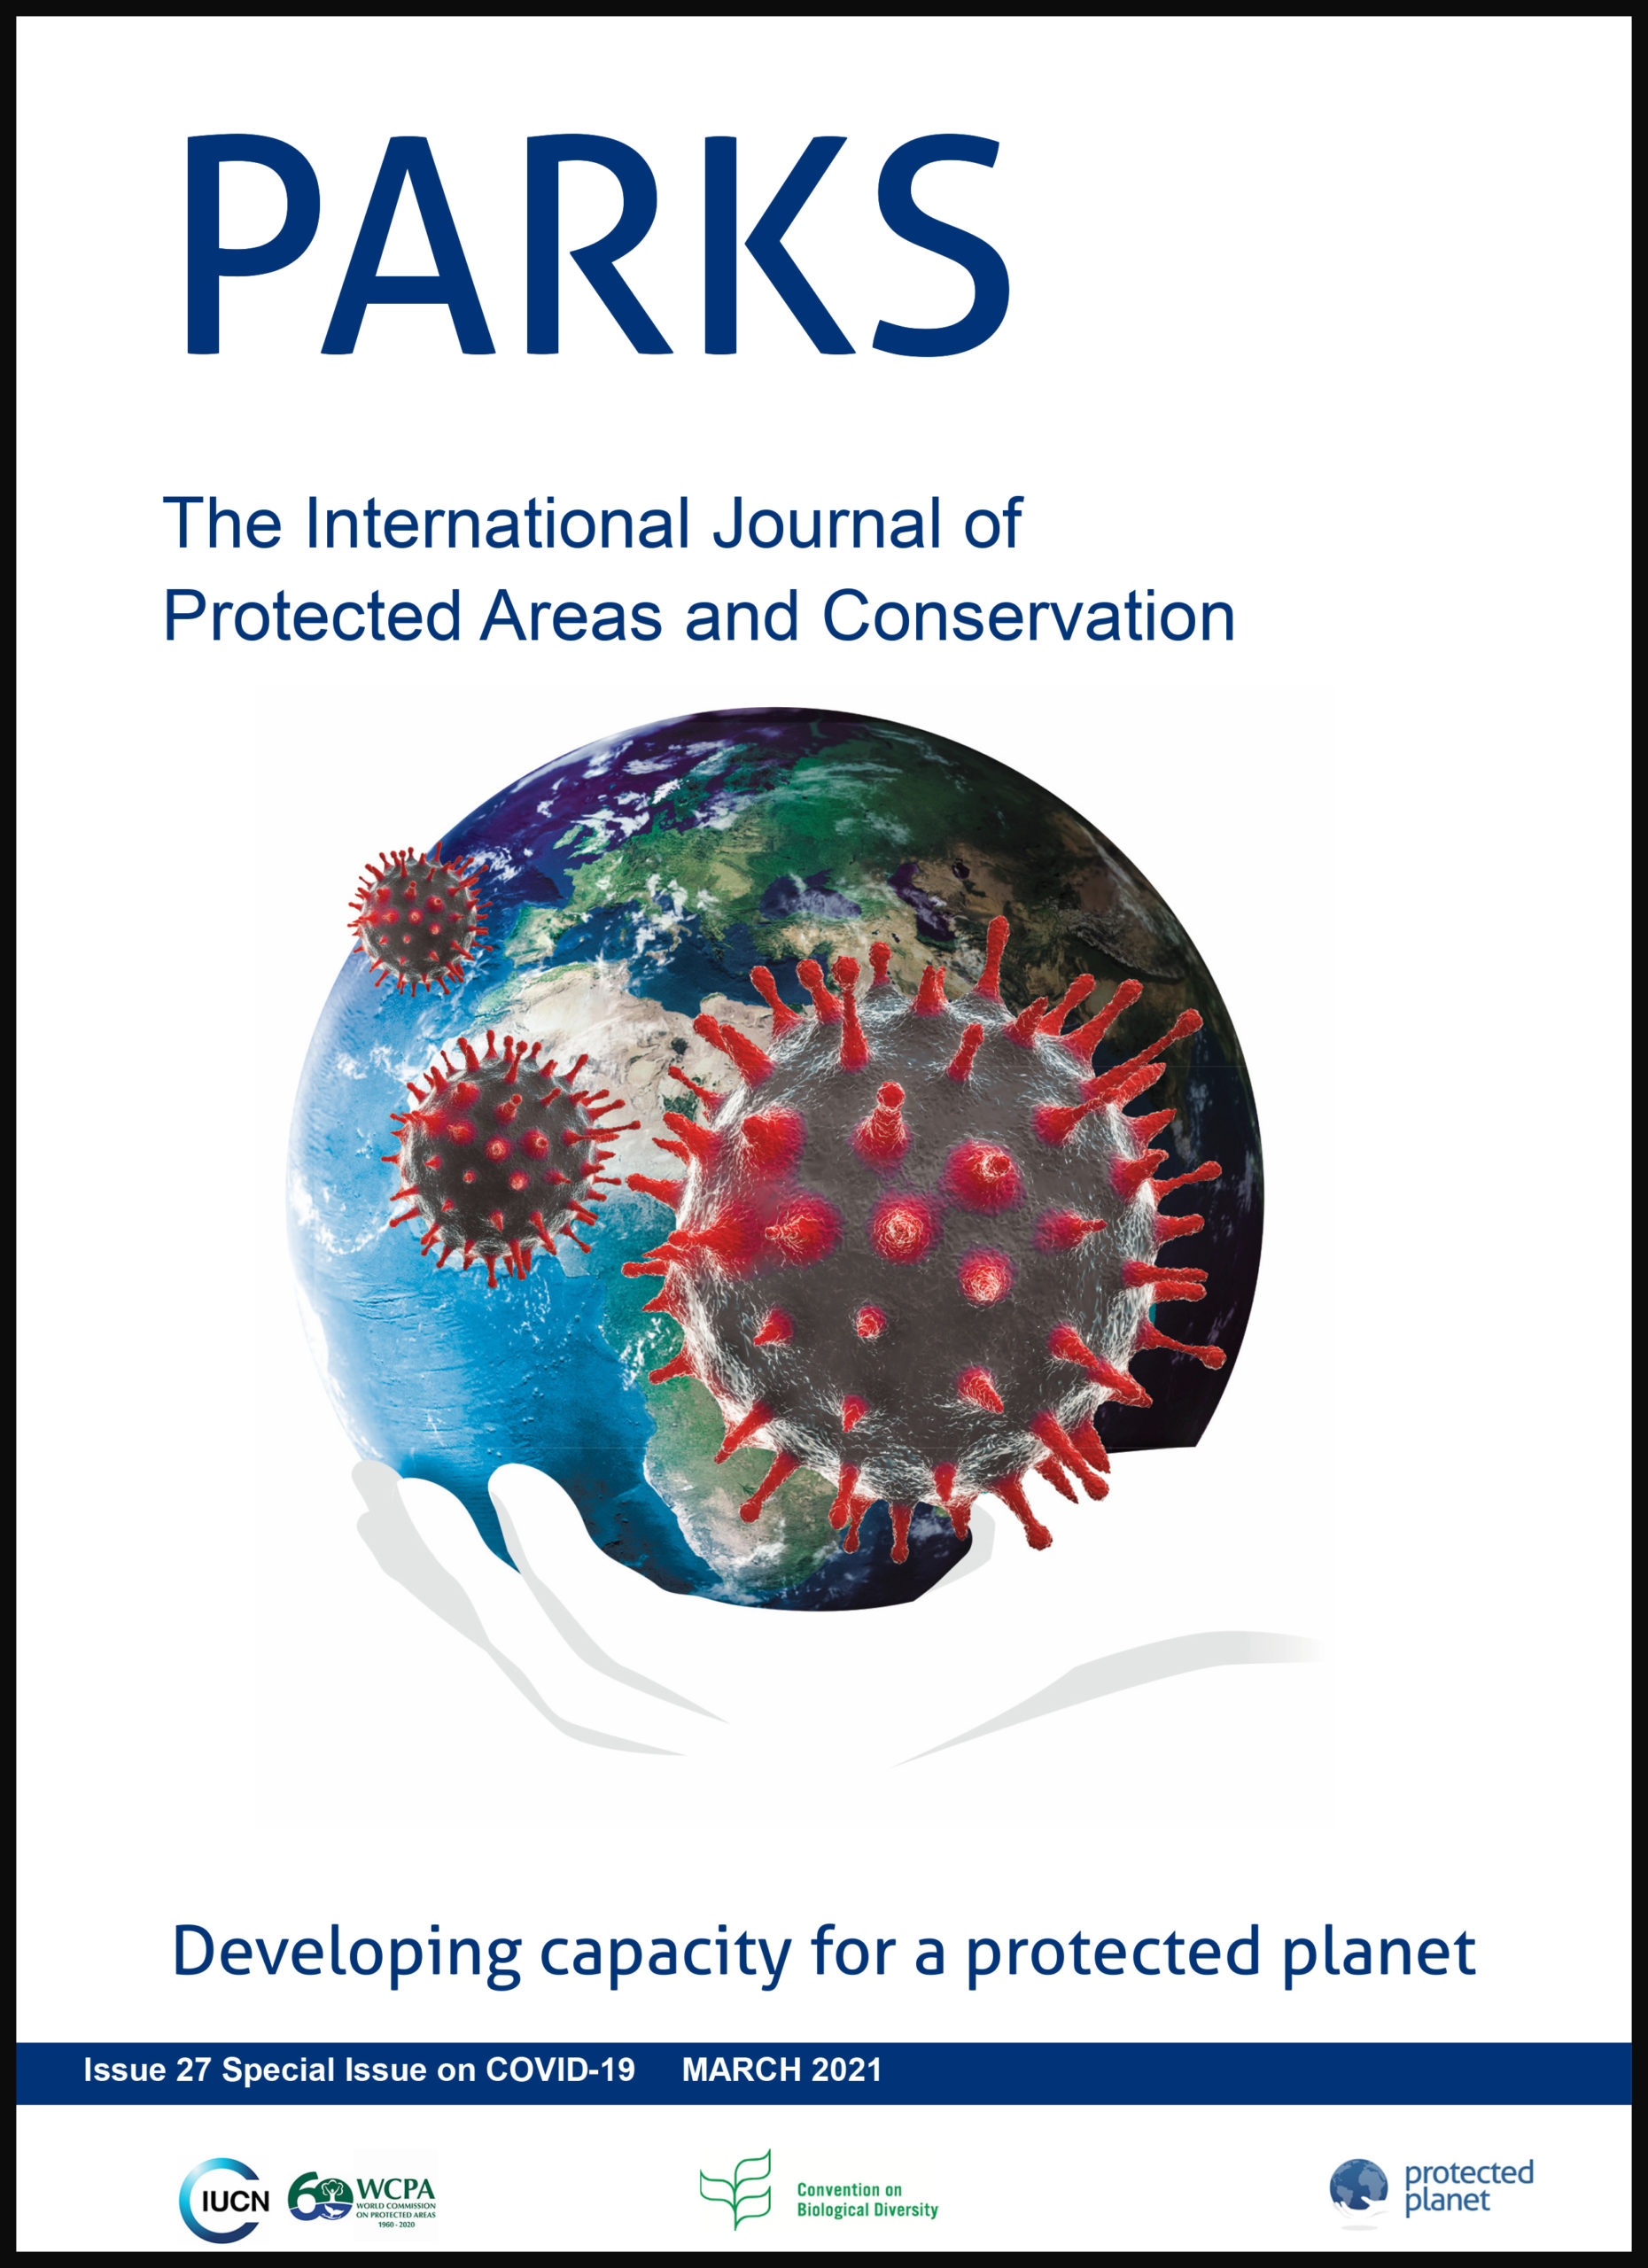 PARKS special issue journal cover